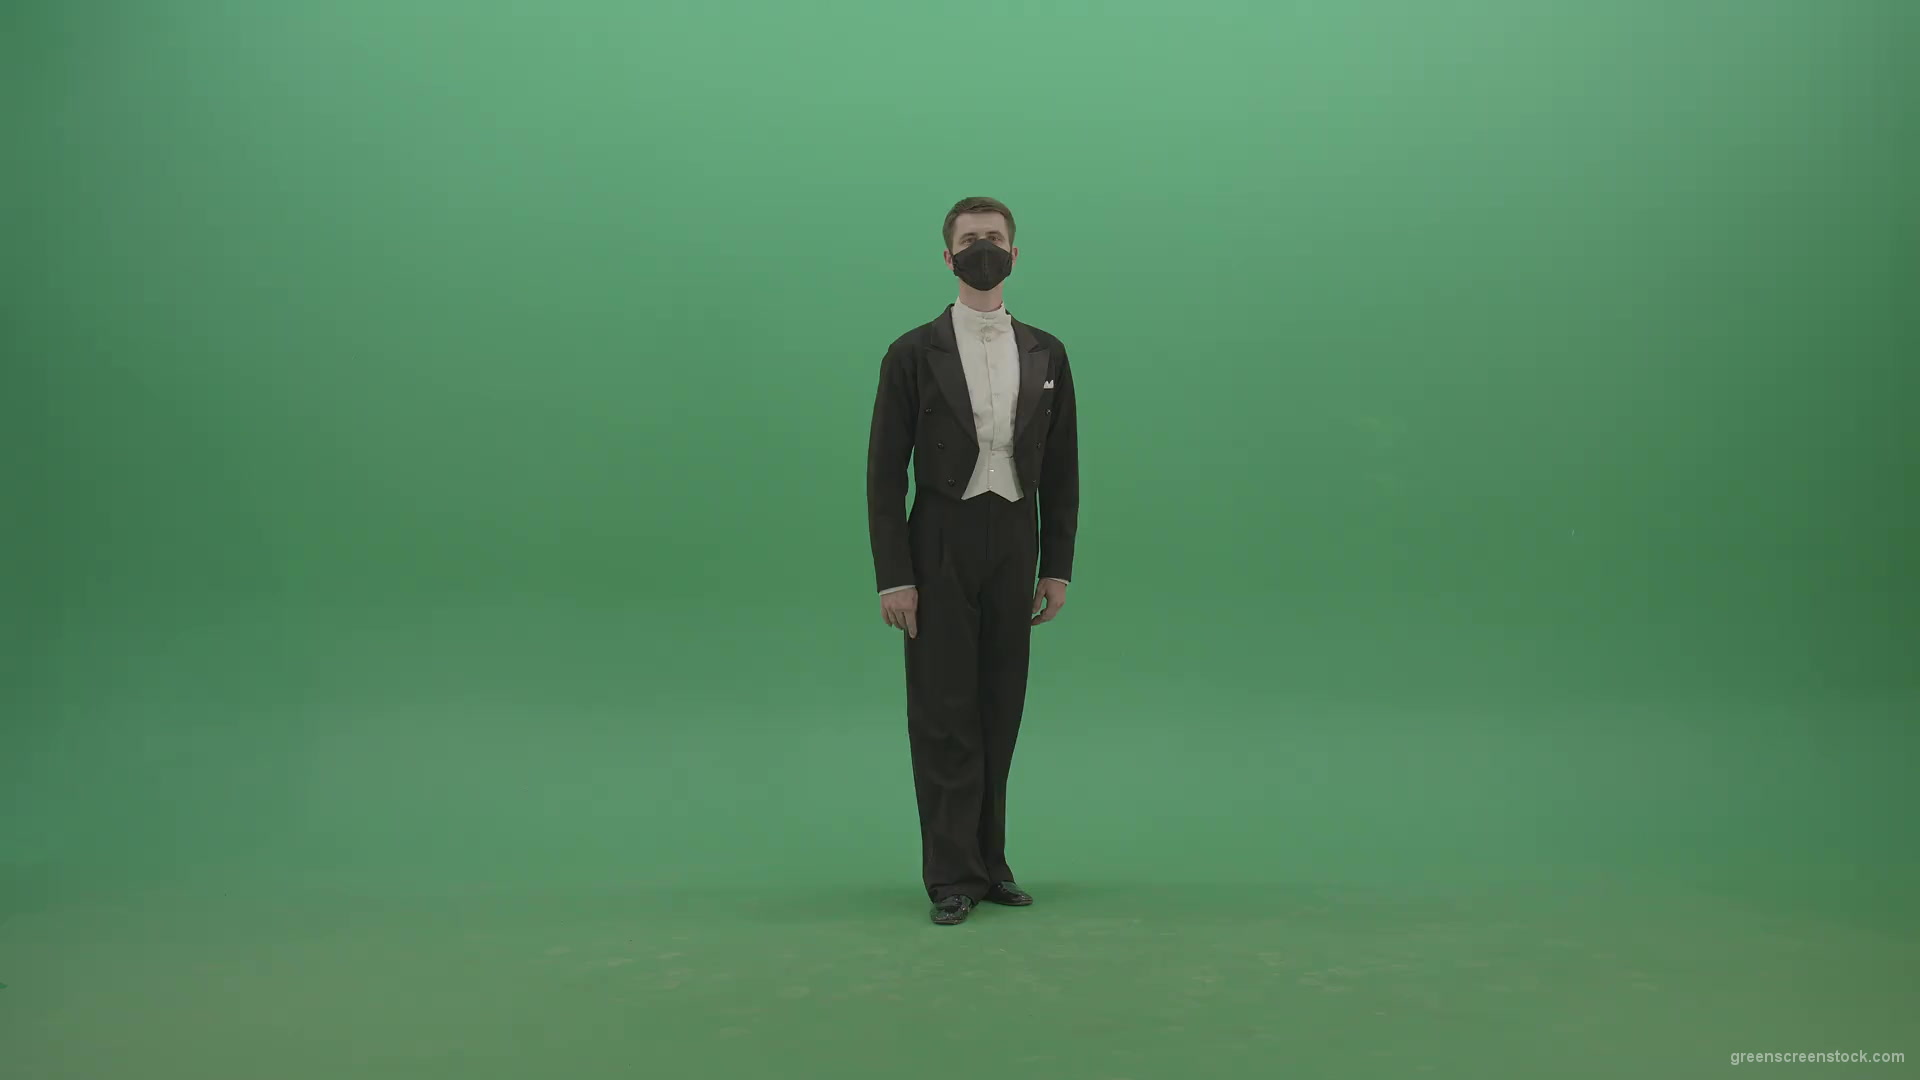 Man-in-Classical-ballroom-suite-making-wish-regards-to-impres-audience-in-black-medicine-mask-on-green-screen-4K-Video-Footage-1920_001 Green Screen Stock